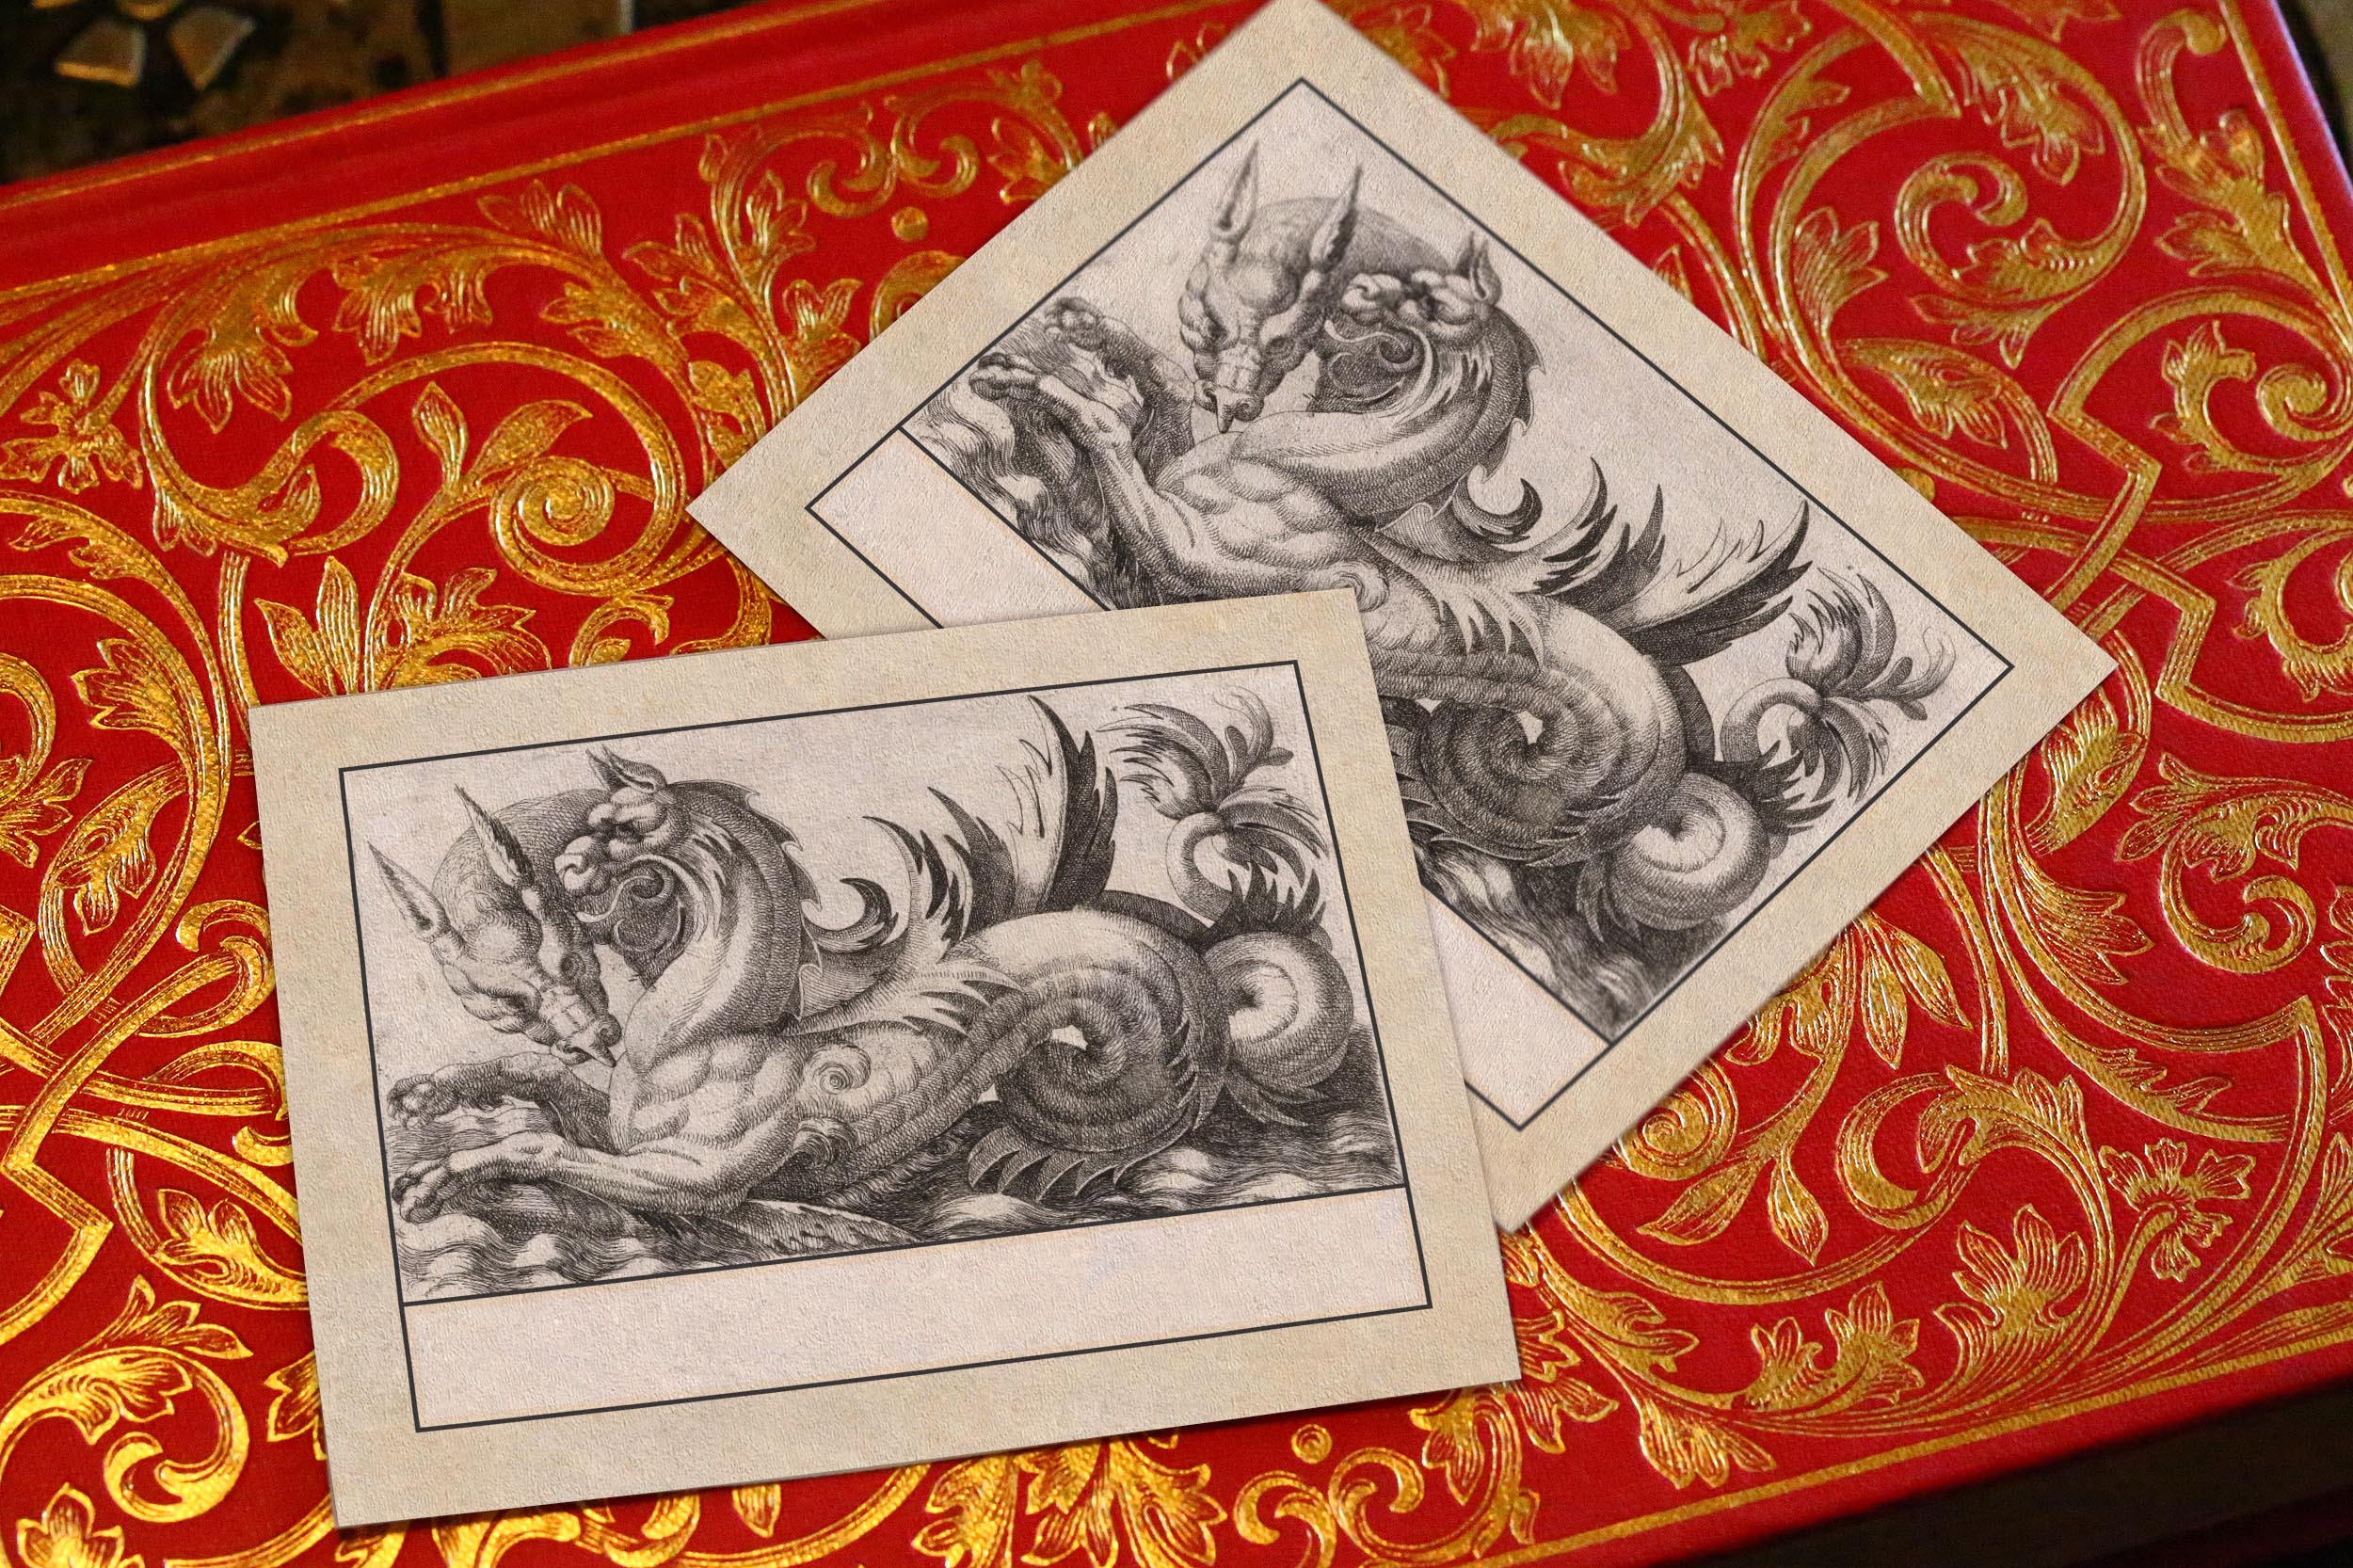 Sea Monsters, Personalized Ex-Libris Bookplates, Crafted on Traditional Gummed Paper, 3.25in x 2.5in, Set of 30